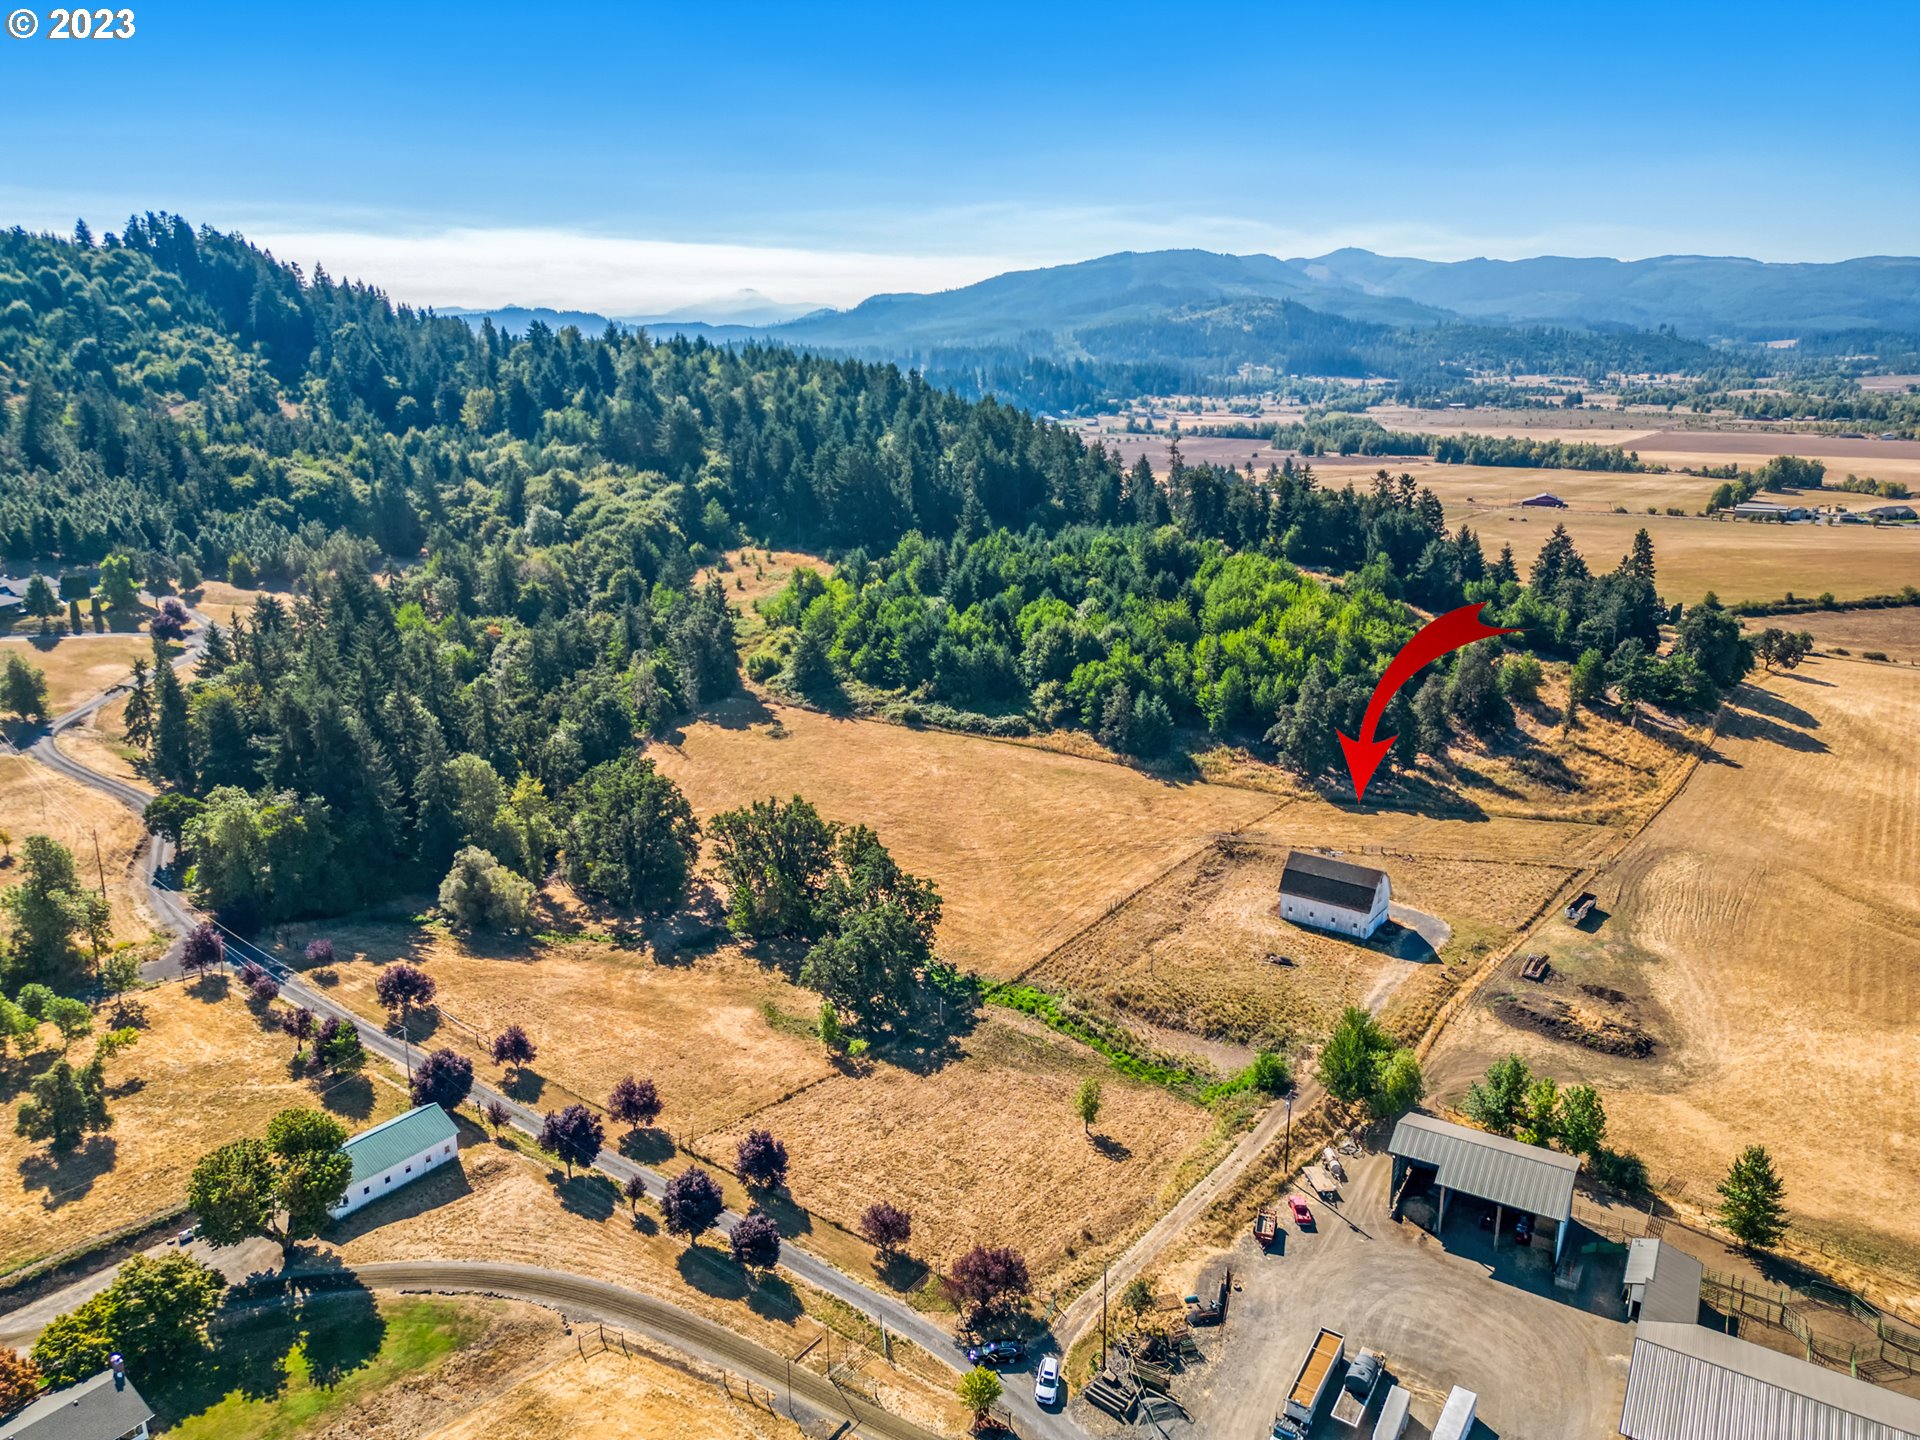 Cloverdale RD 2, Creswell, OR 97426